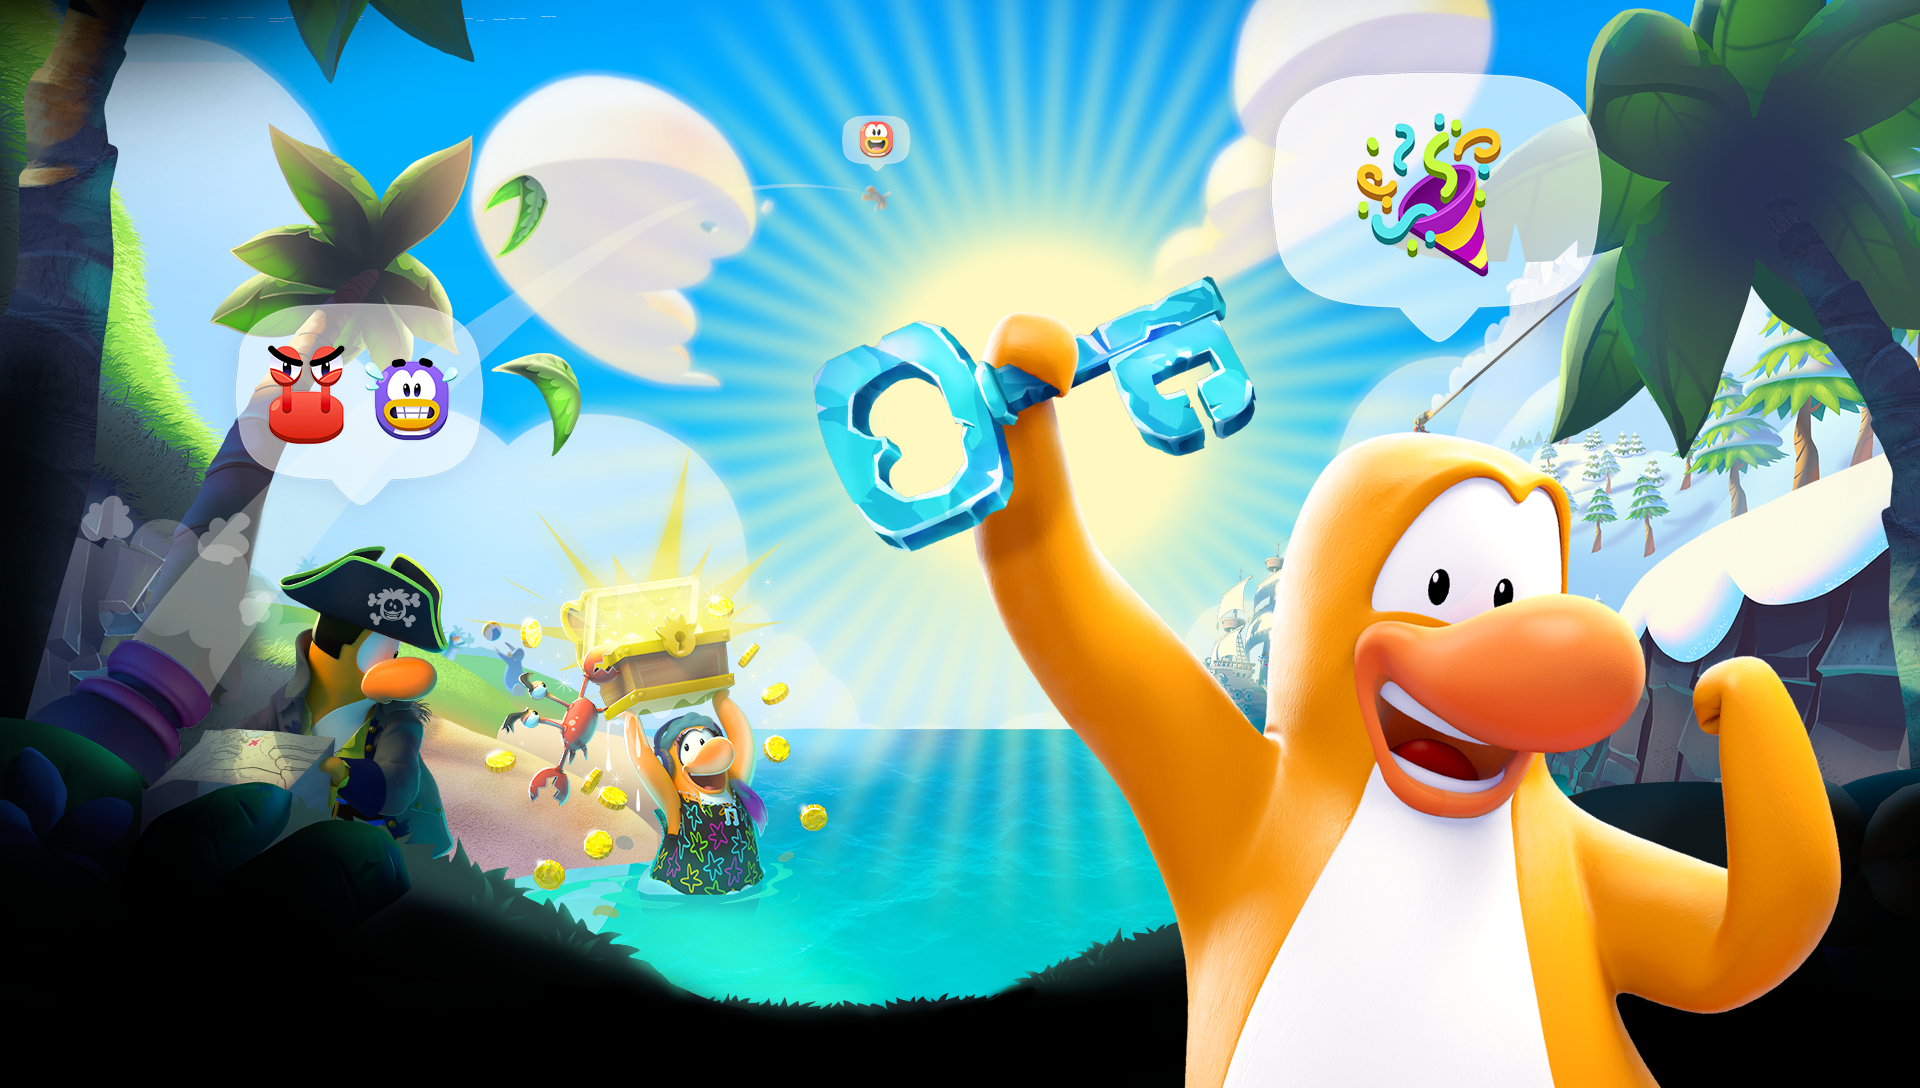 The last remnants of Club Penguin are sunsetting, again, as Disney lays off Club  Penguin Island staff